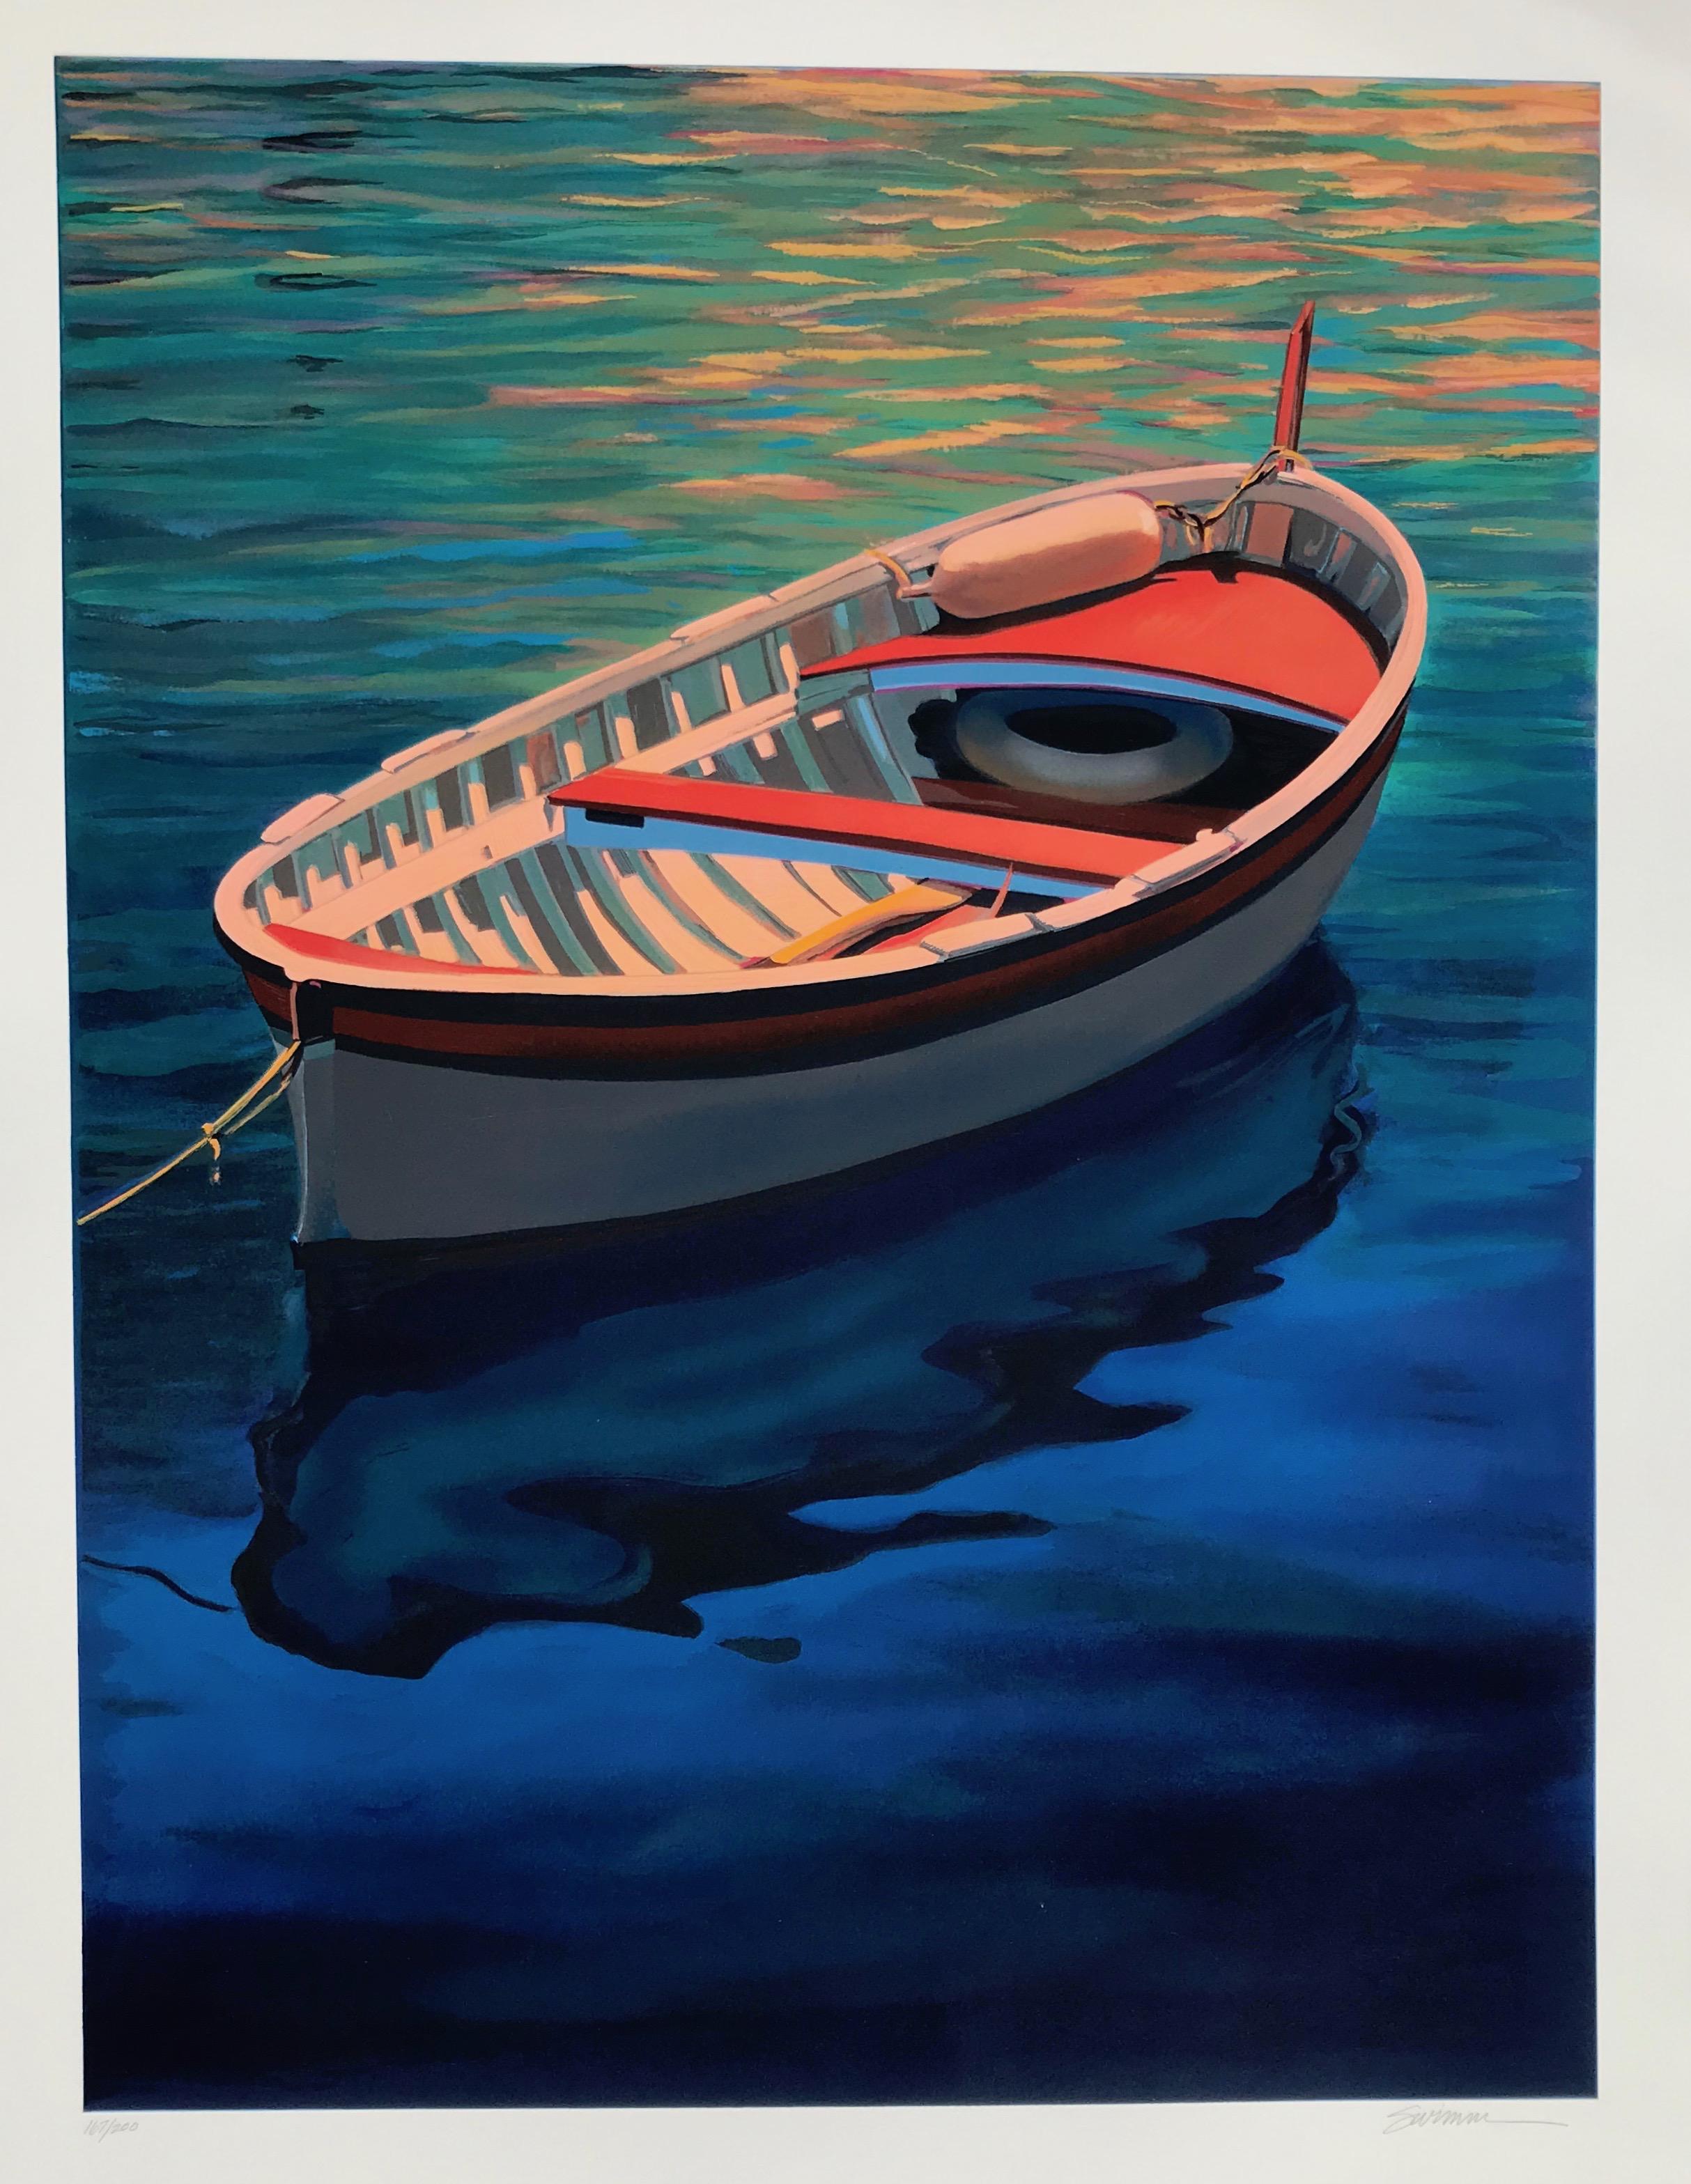 Tom Swimm Landscape Print -  "Harbor Rainbow" Colorful Boat With Deep Blue Water Reflections Serigraph